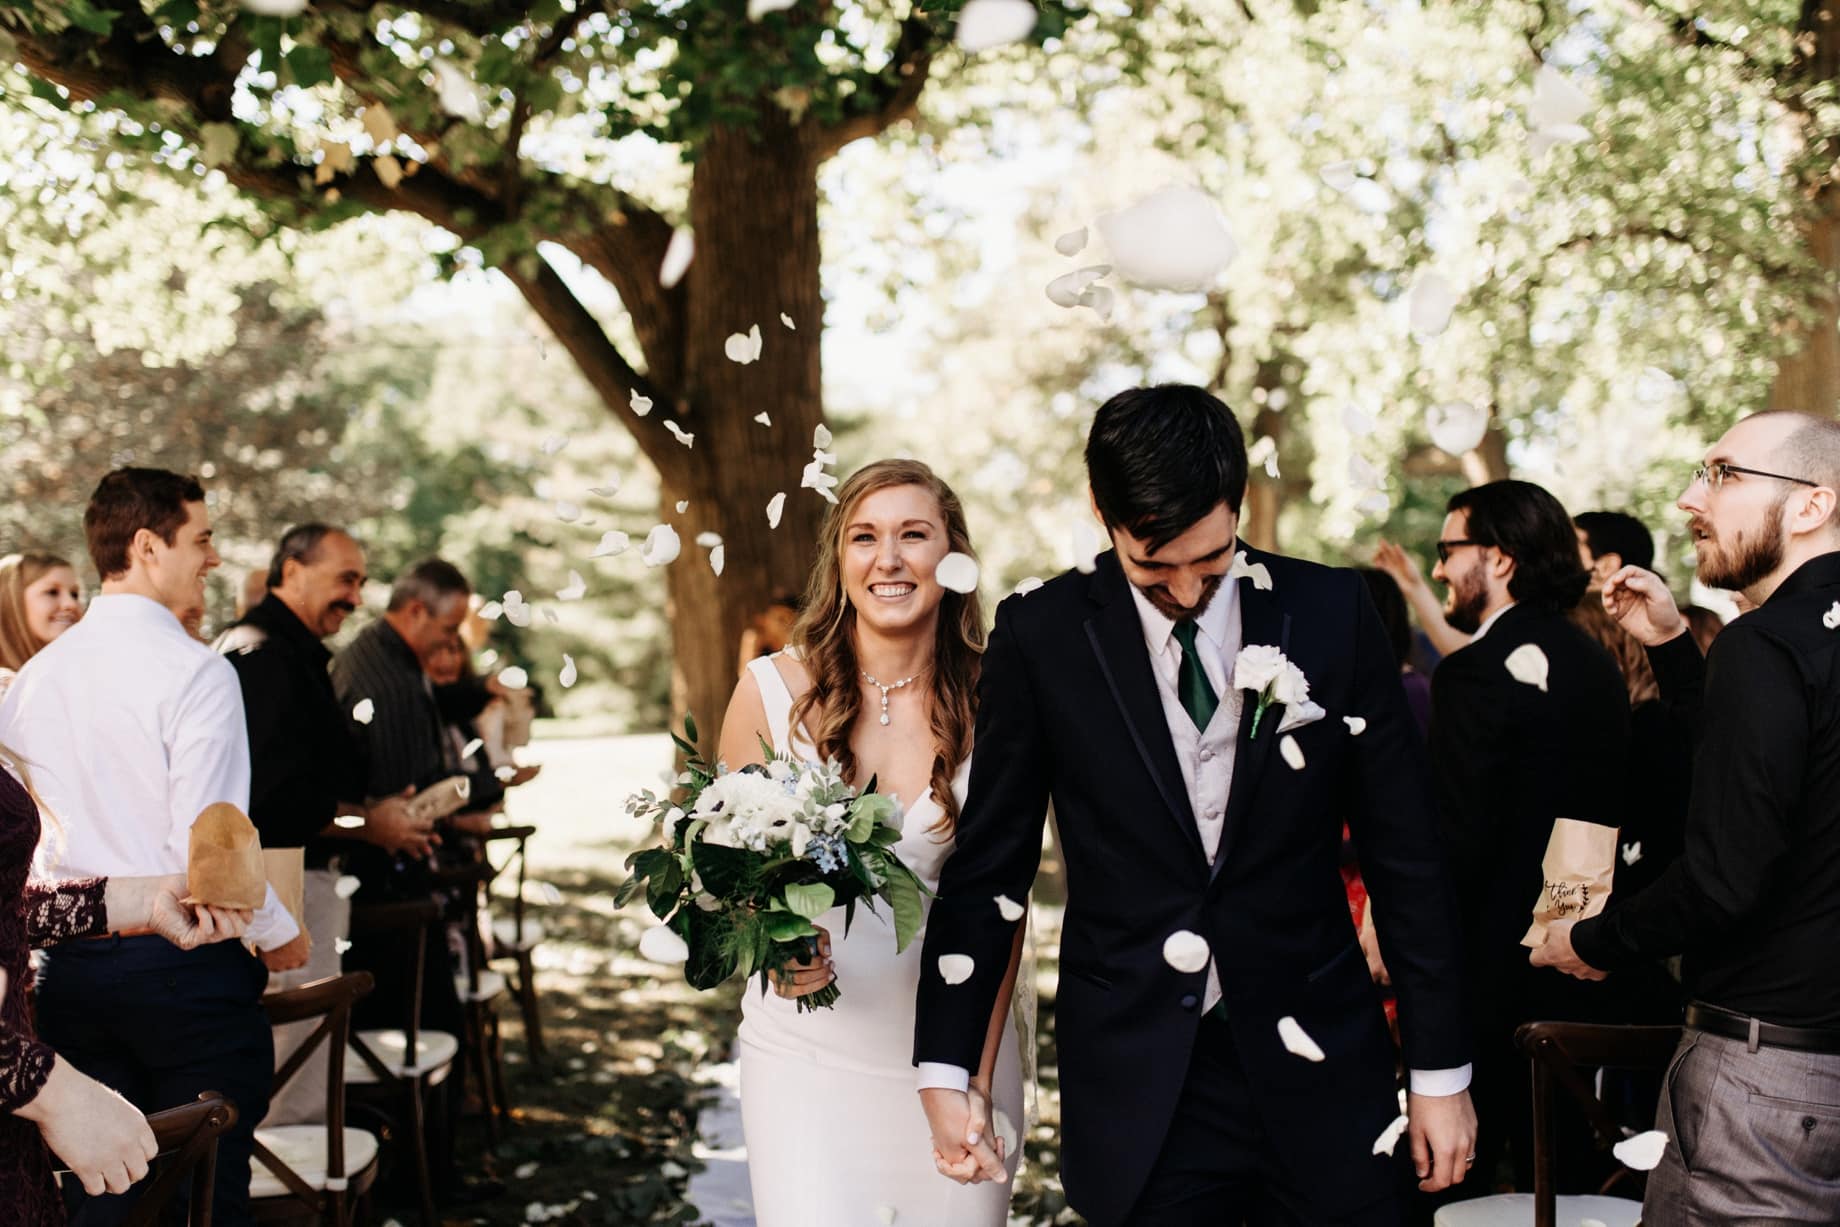 wedding guest throw petals on a couple after their wedding ceremony